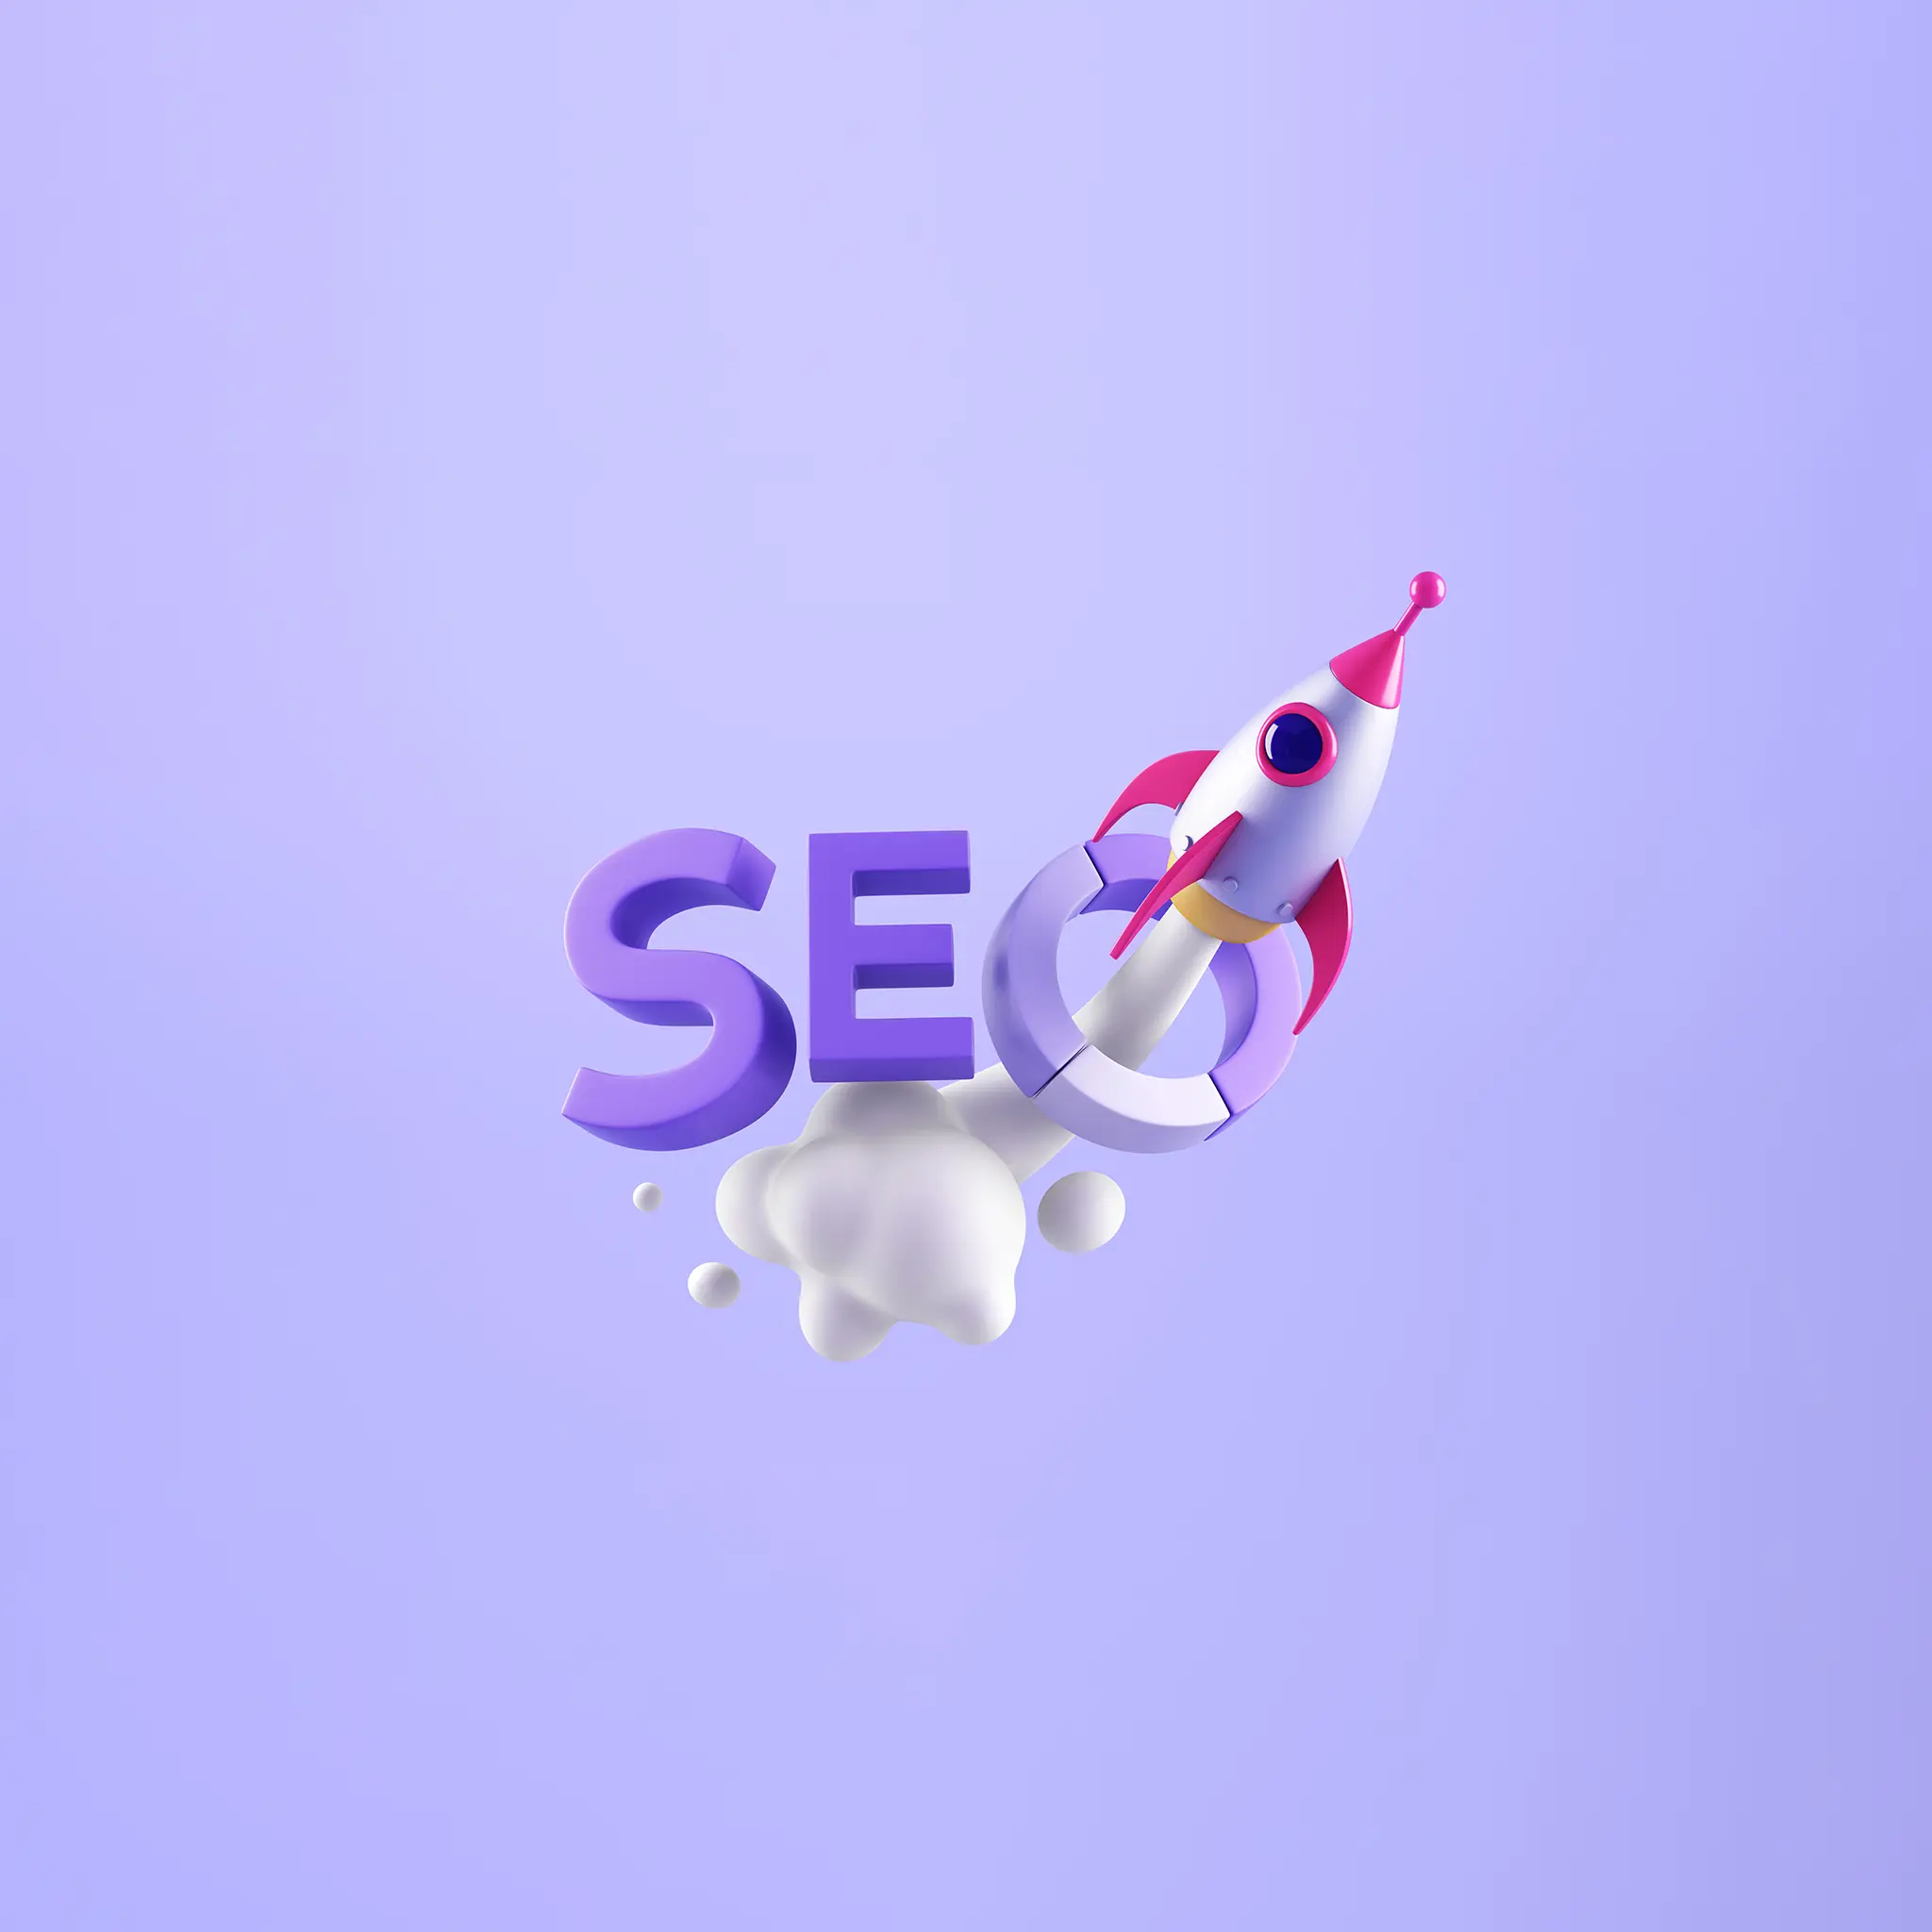 Boost your Magento SEO - image illustrating a rocket launching from the 'O' in 3D 'SEO' text